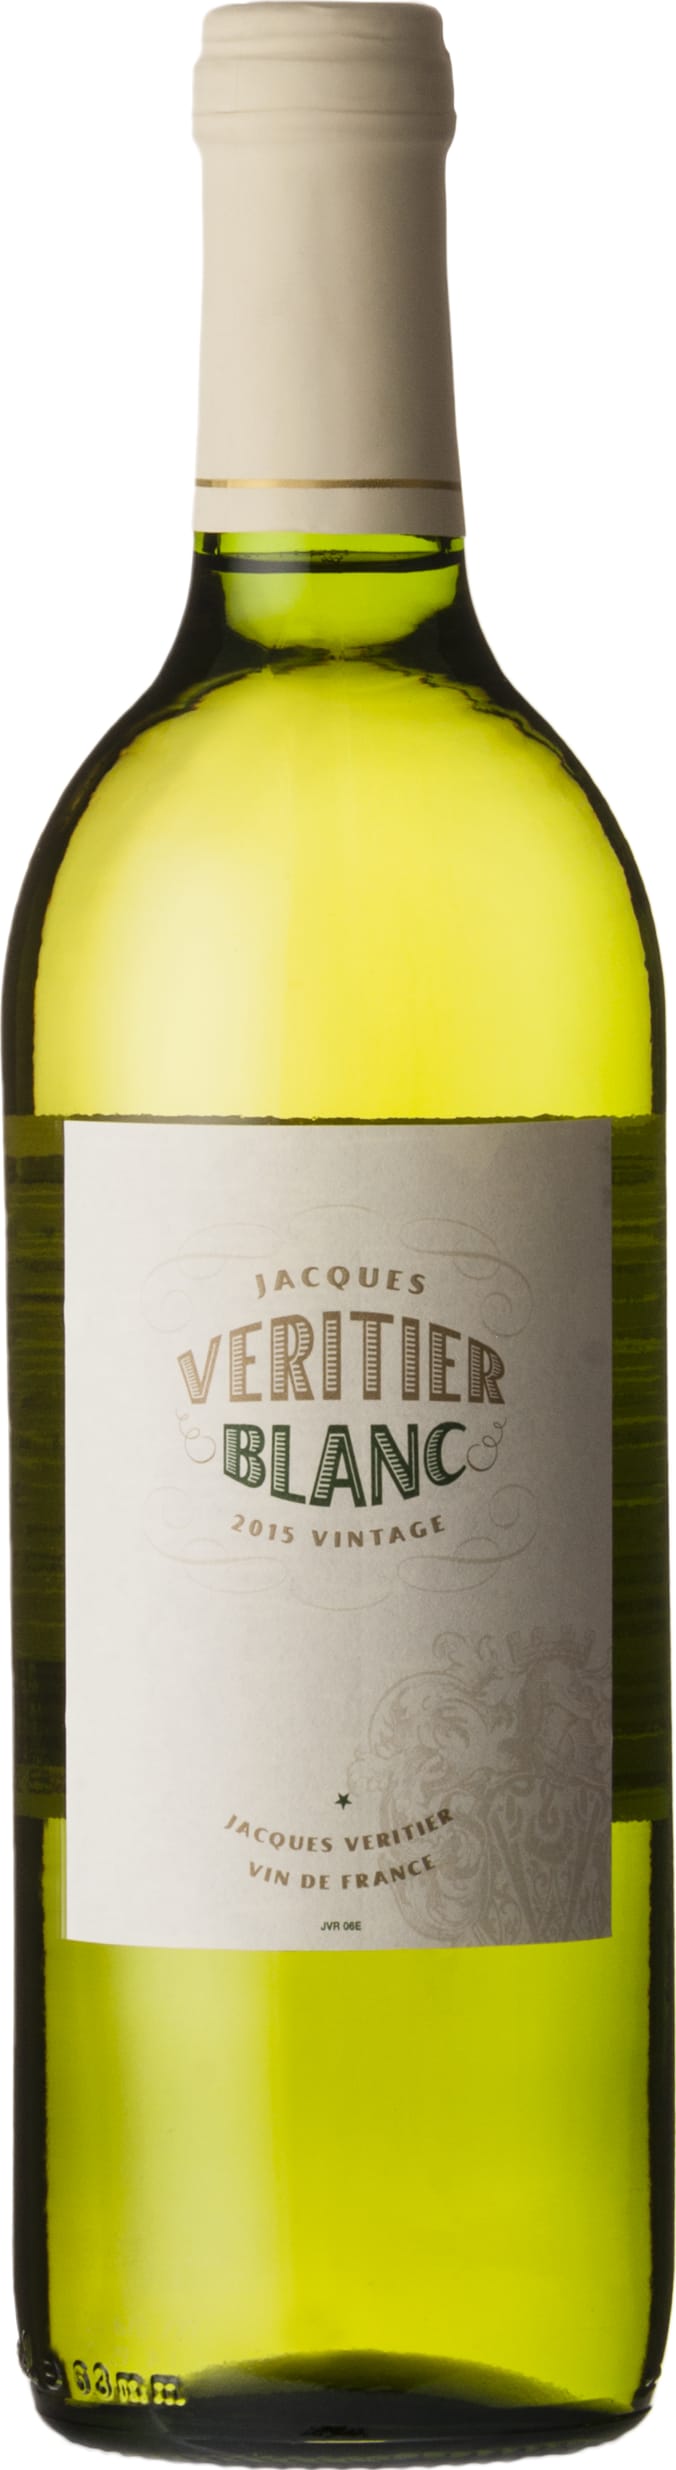 Jacques Veritier Blanc 2022 75cl - Buy Jacques Veritier Wines from GREAT WINES DIRECT wine shop